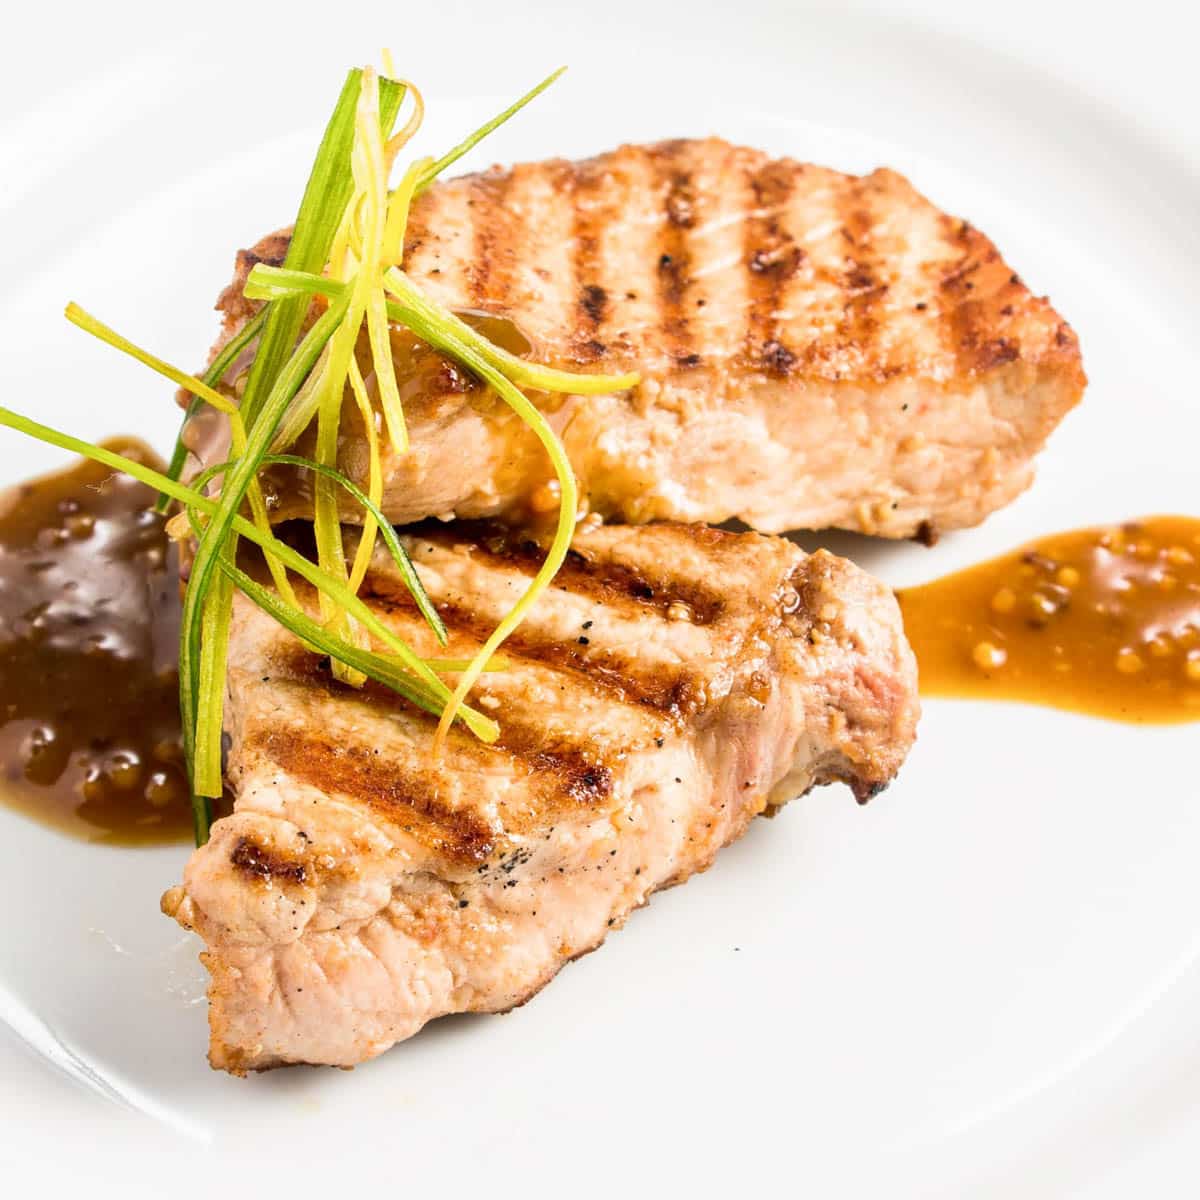 Grilled pork chops on a white plate with mustard sauce.